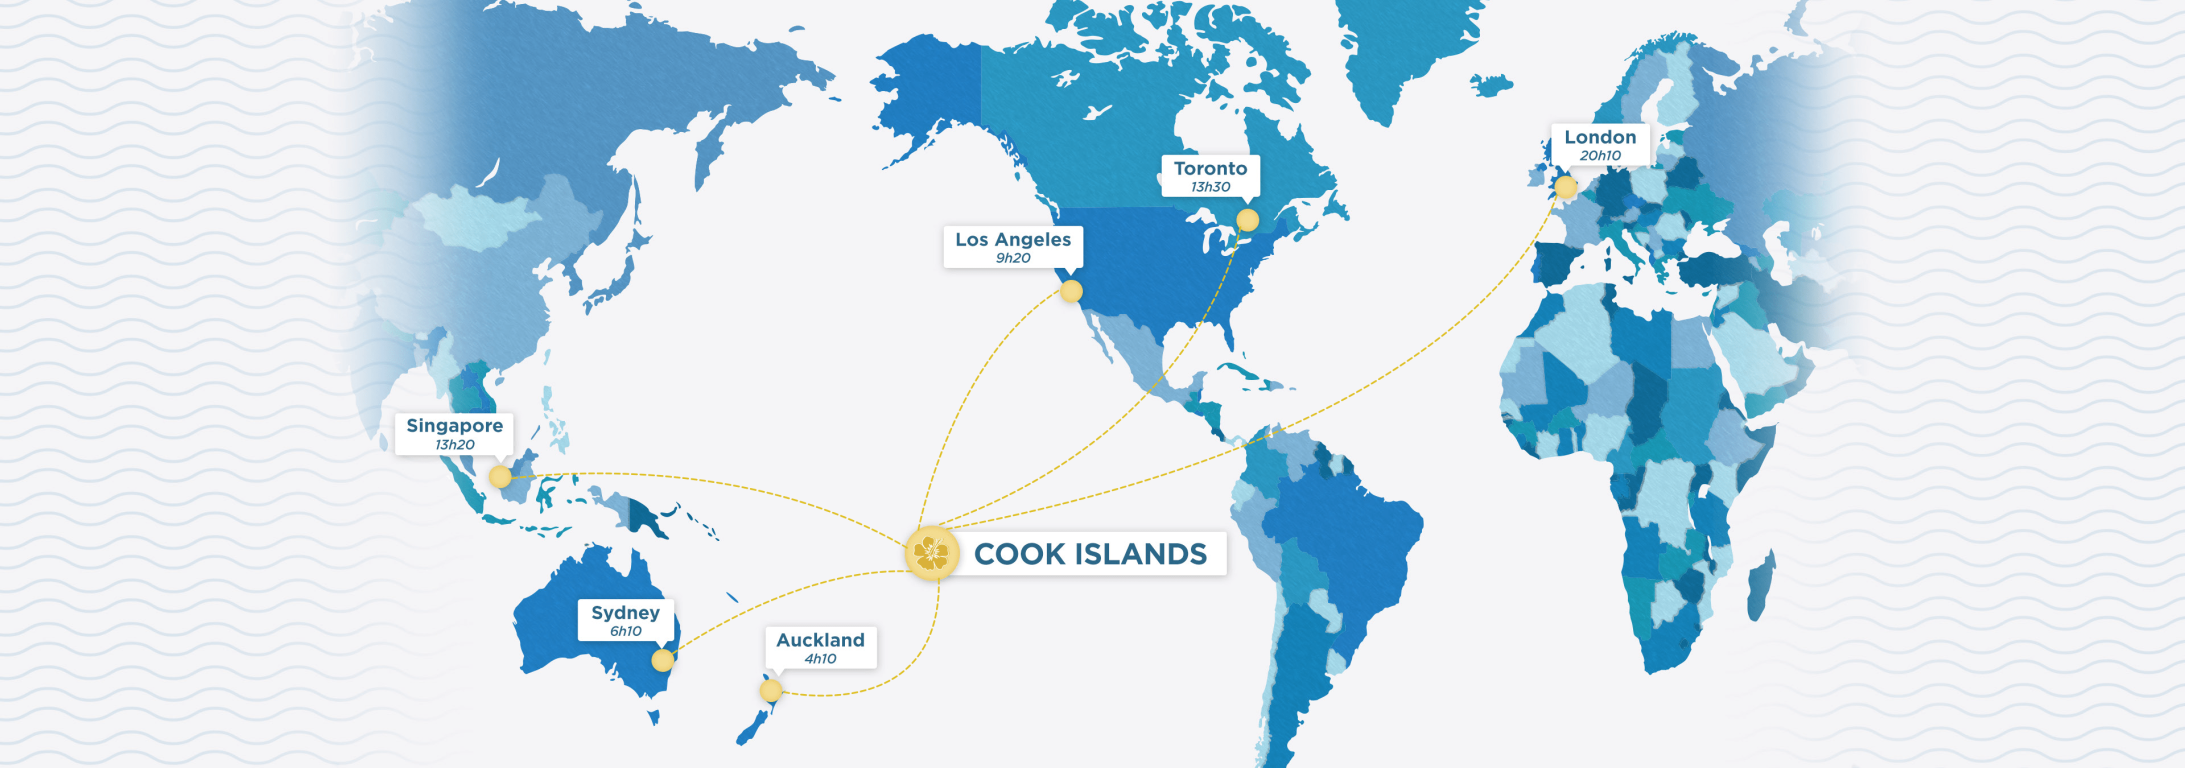 Map showing flight times from USA, Europe, Canada, Singapore, Australia and New Zealand from the Cook Islands